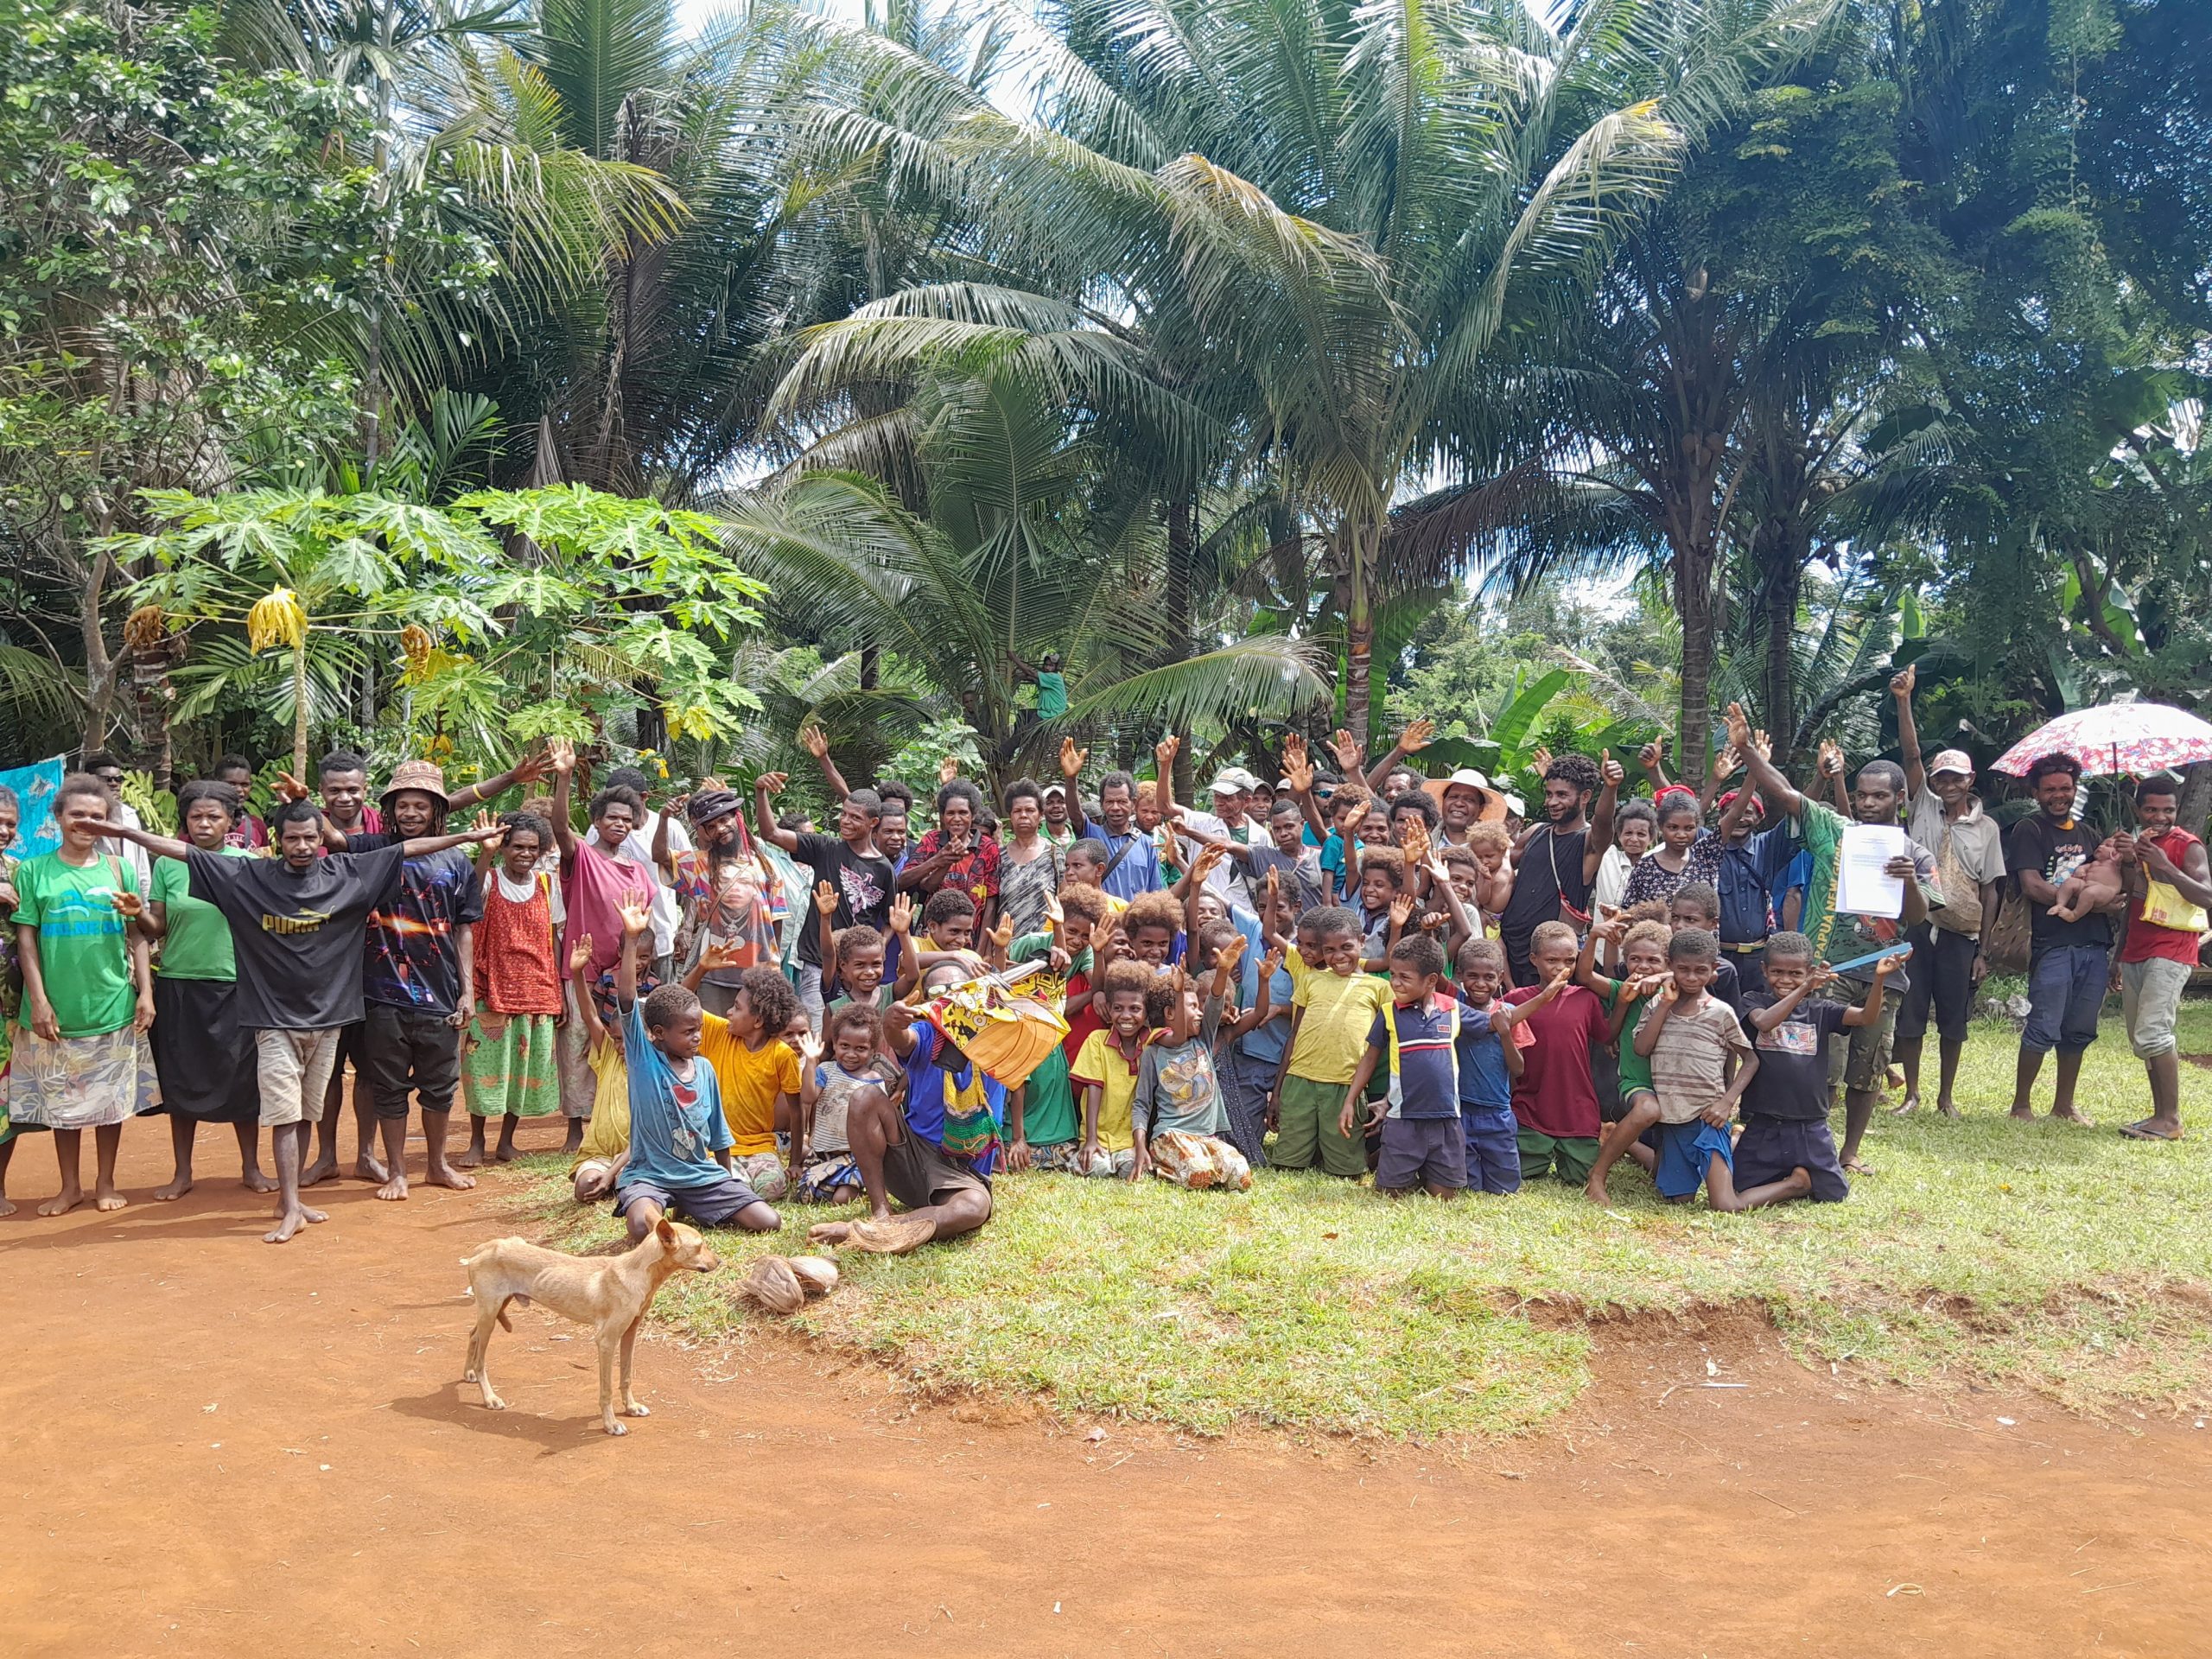 A group of people in Waduada community in Papua New Guinea standnig in front of palm trees and waving their hands 